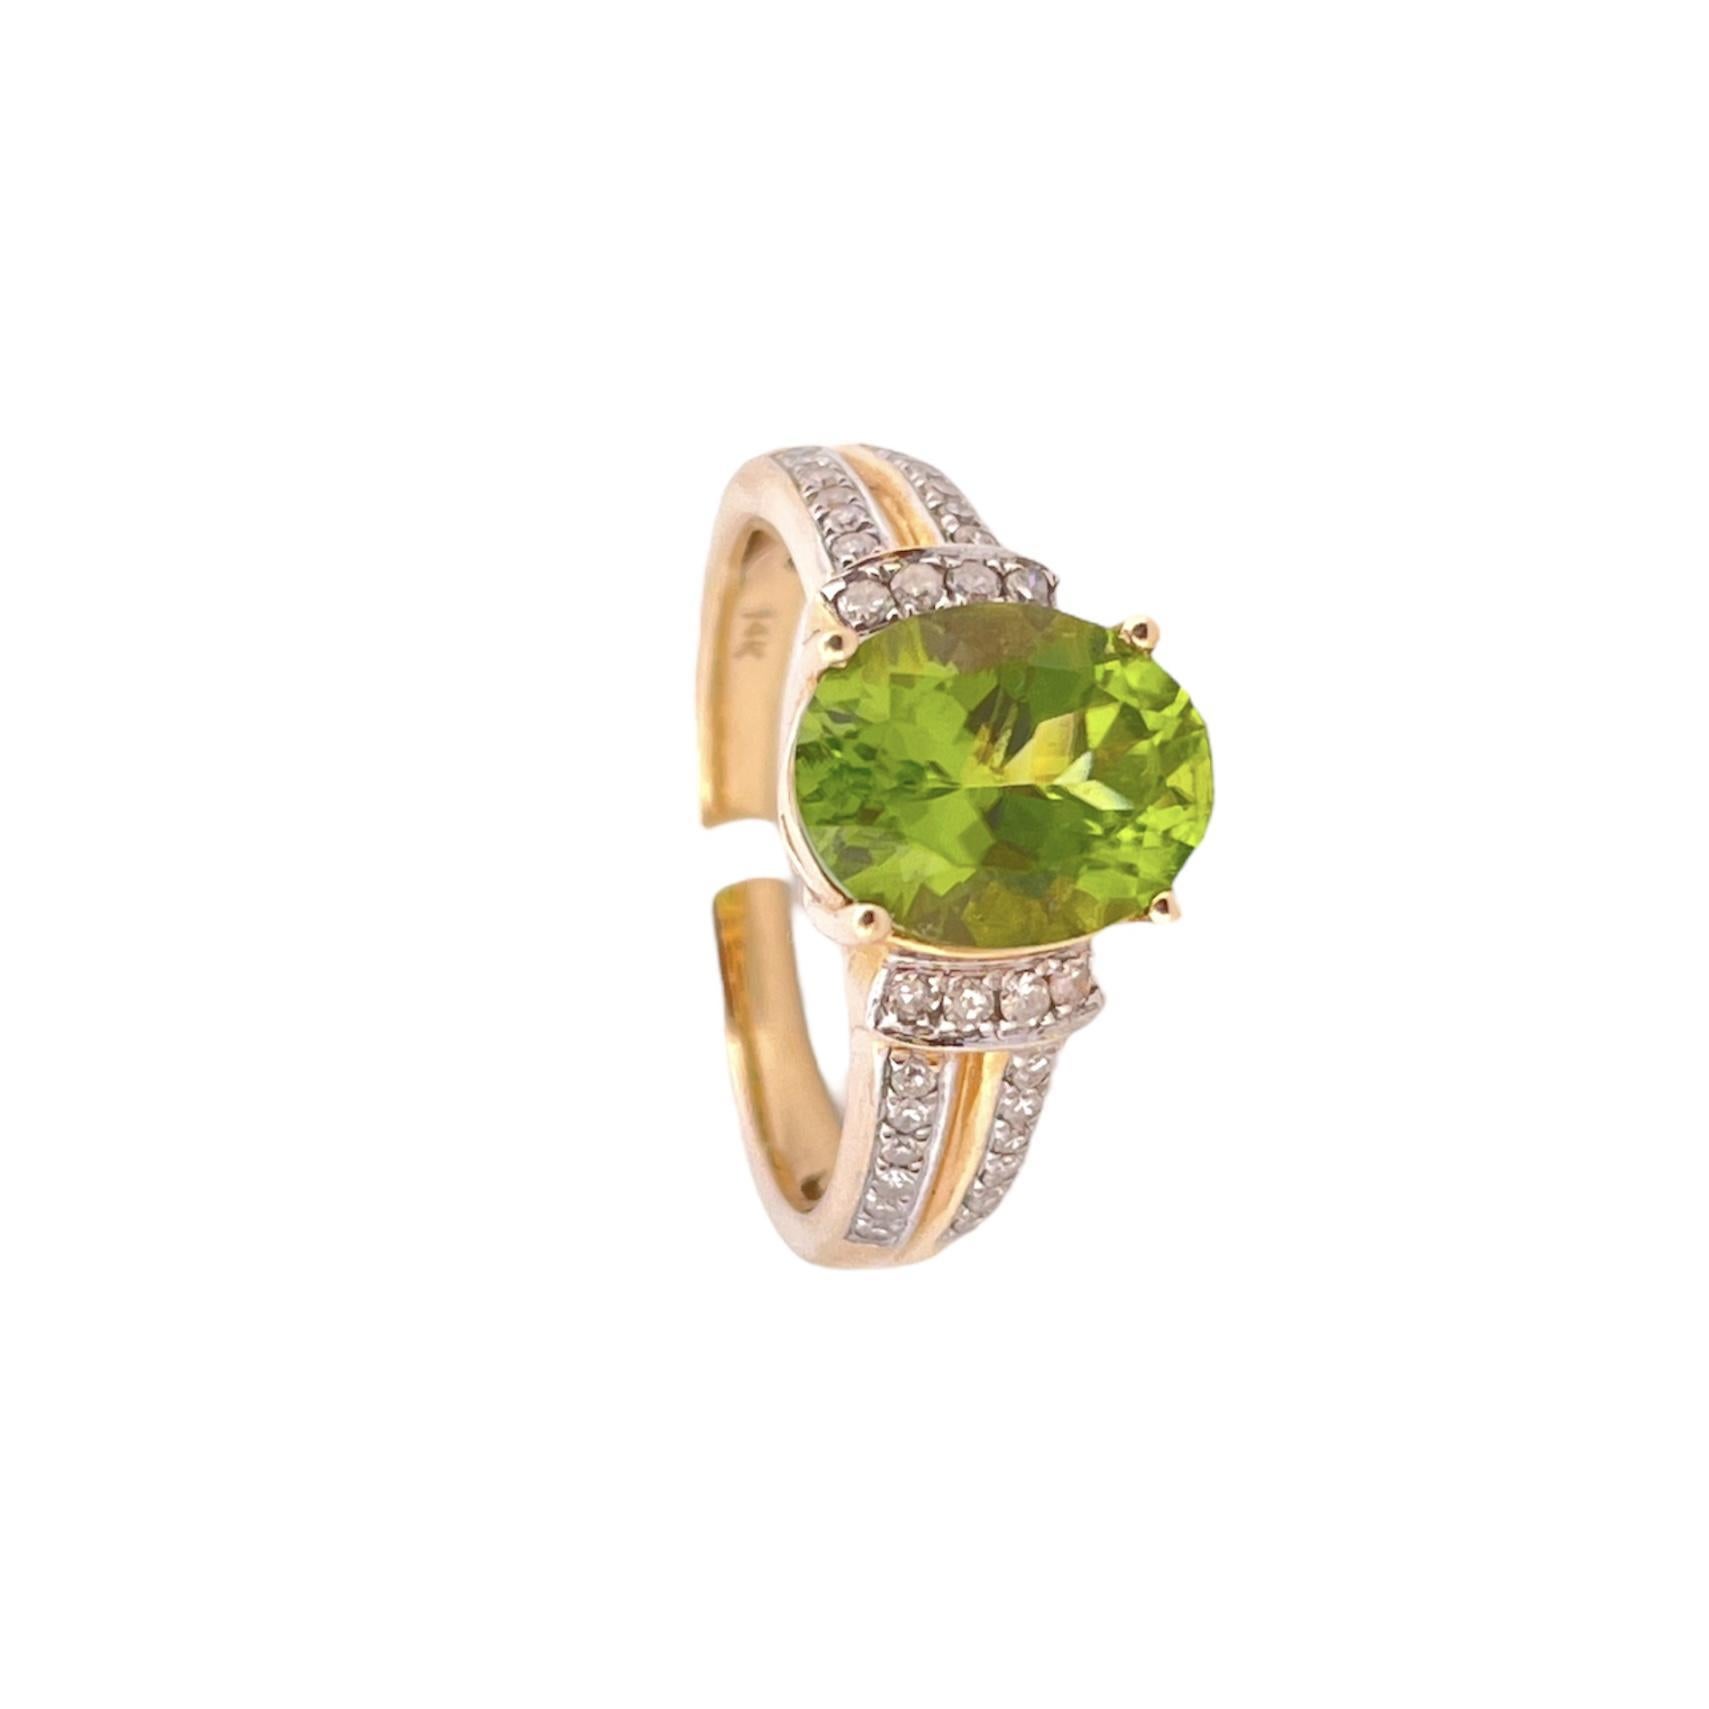 Elevate your jewelry collection with this exquisite Oval Peridot Ring, featuring a stunning oval-shaped peridot gemstone and sparkling diamond accents with a total carat weight (TCW) of 0.40. Crafted in luxurious 14K yellow gold, this ring is a